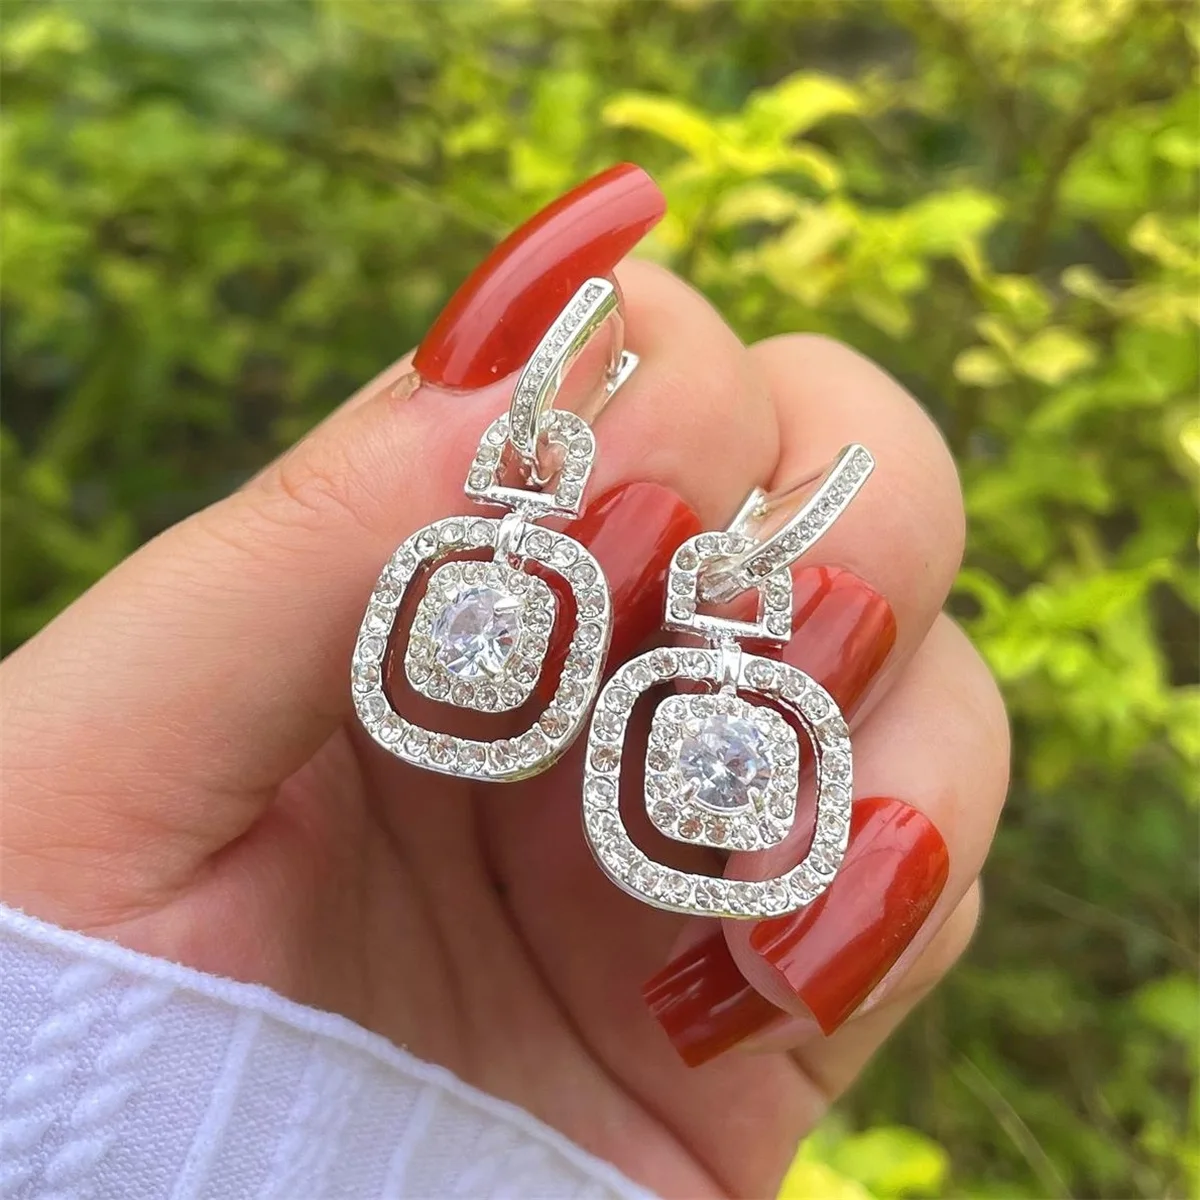 

ANGLANG Lovely Square Dangle Earrings for Women White Cubic Zirconia Female Wedding Engagement Party Earrings Drop Jewelry